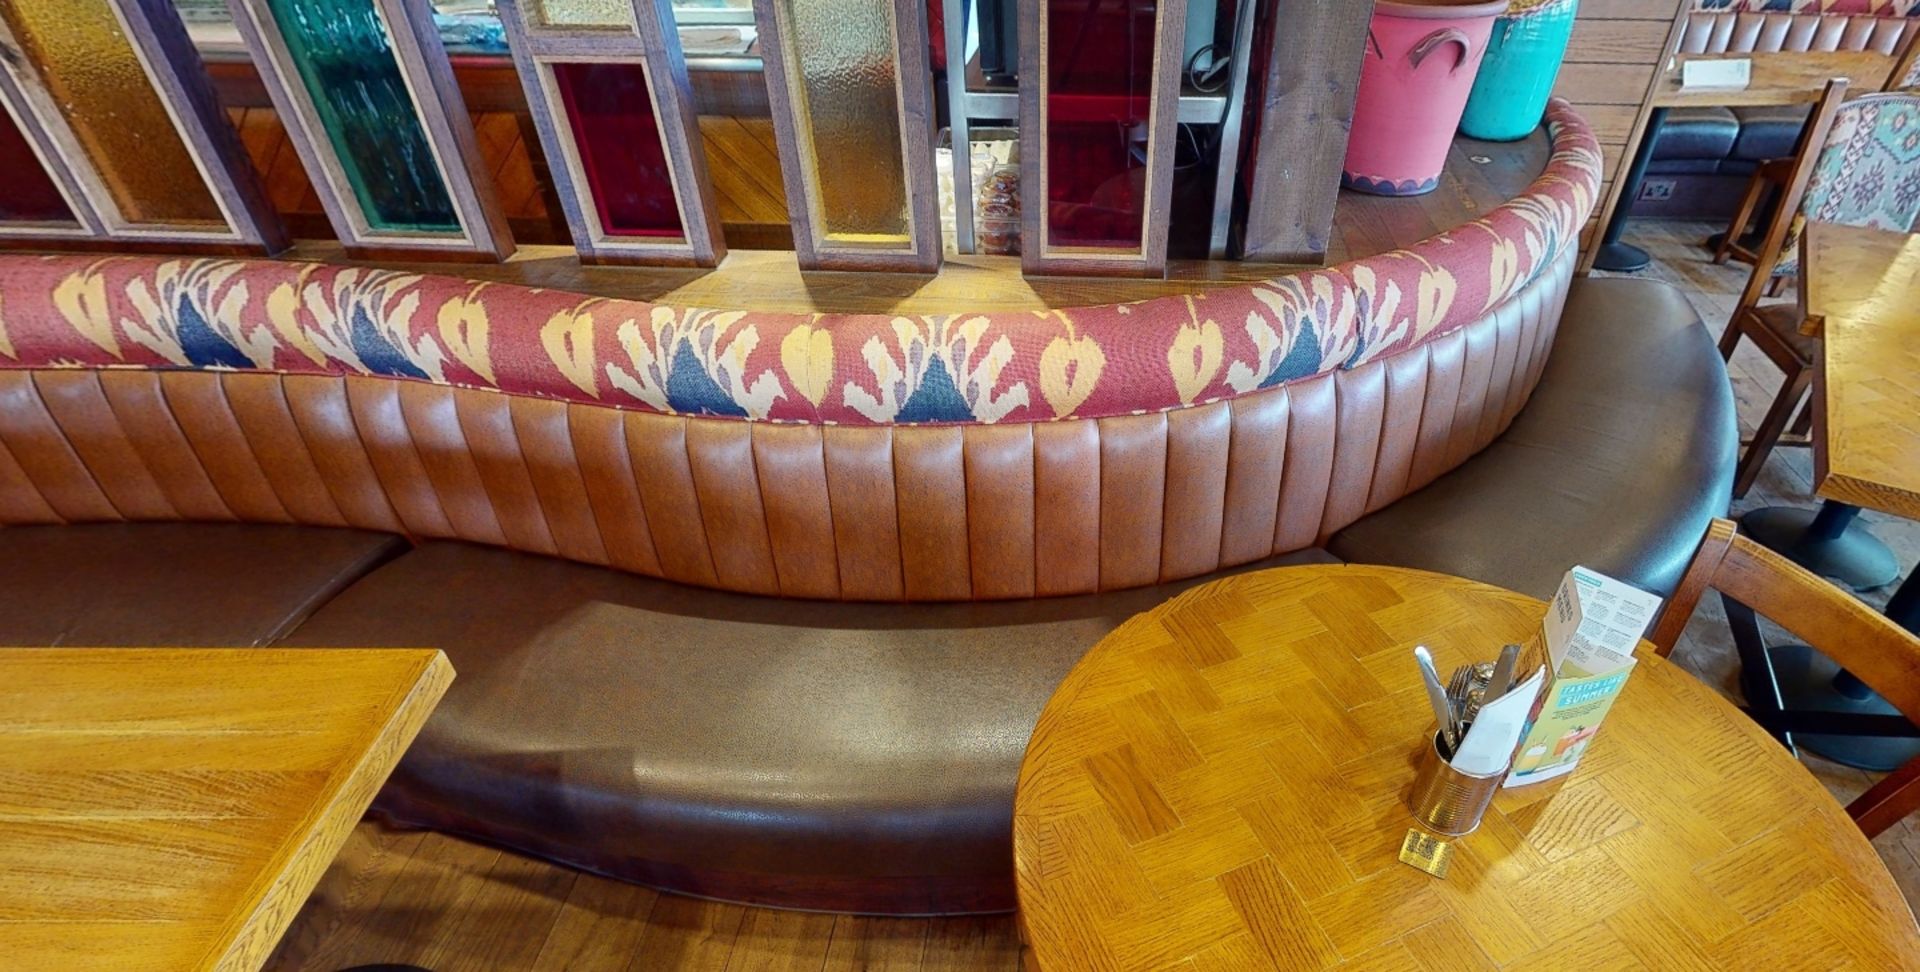 1 x Restaurant Curved Long Seating Bench - Features Brown Faux Leather Seat Pads and Light Brown - Image 2 of 7